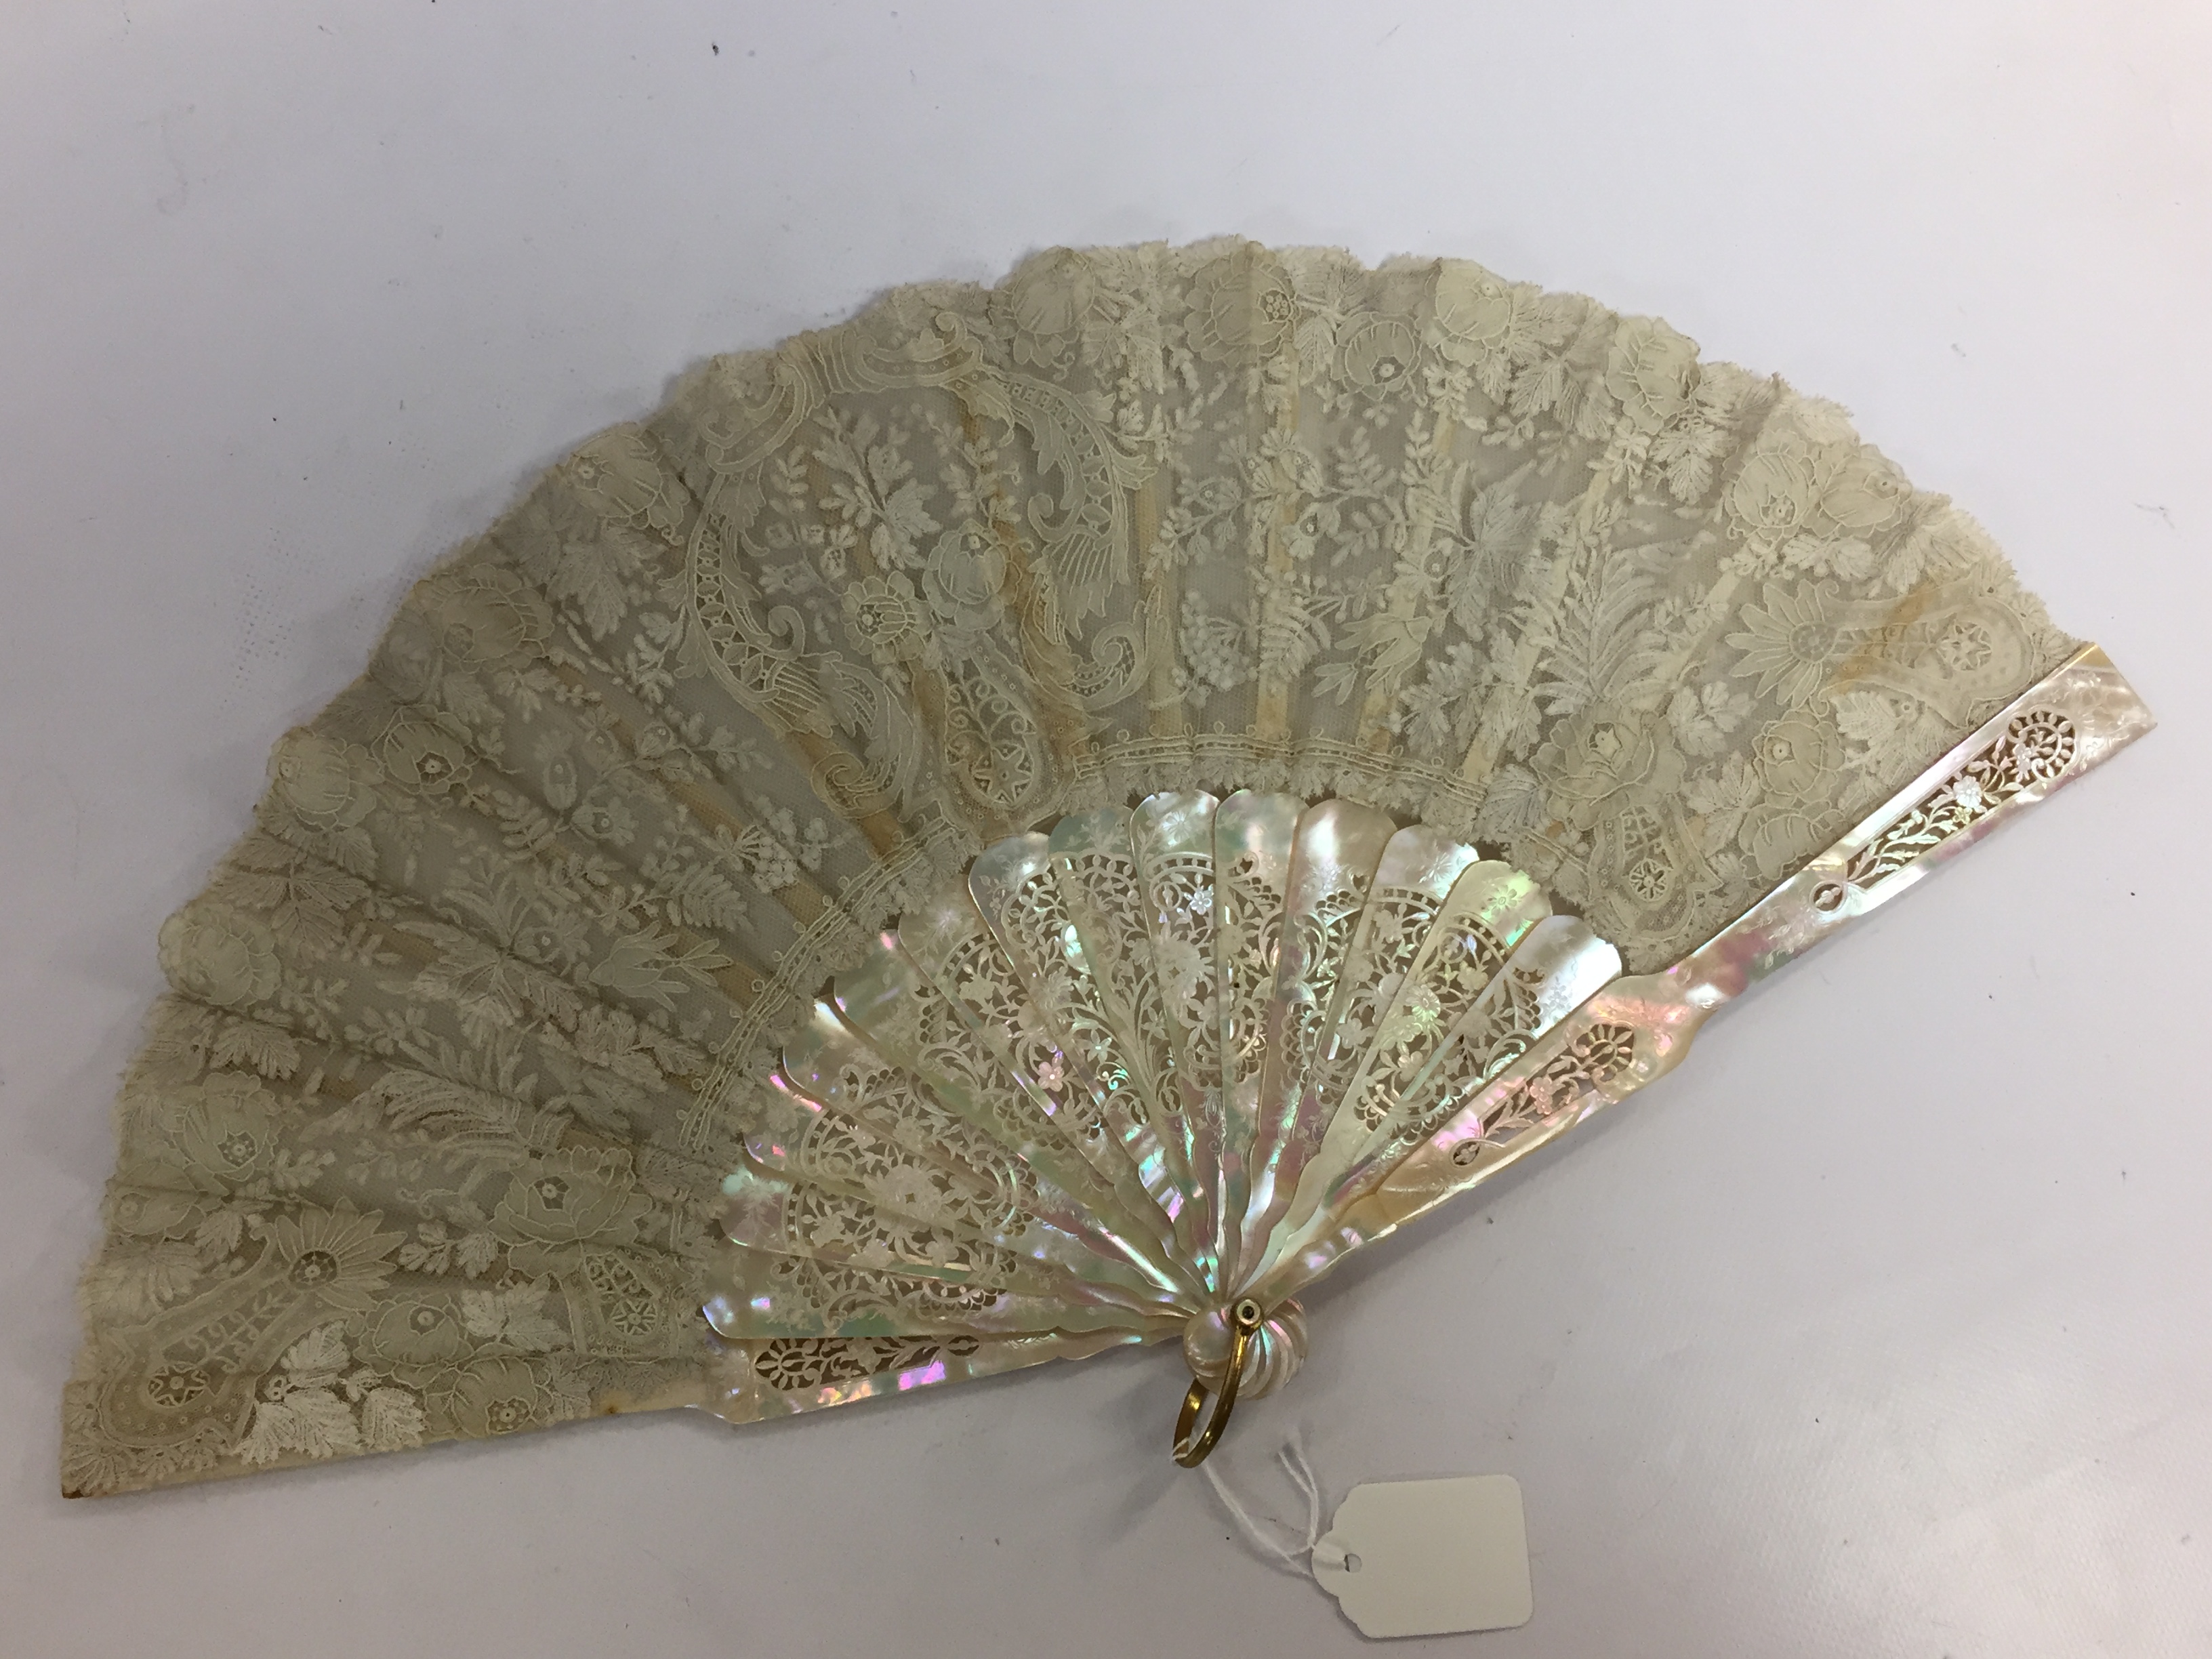 A C19TH FRENCH MOTHER OF PEARL AND SATIN FAN WITH LACE , PRESENTED IN CARDBOARD BOX,